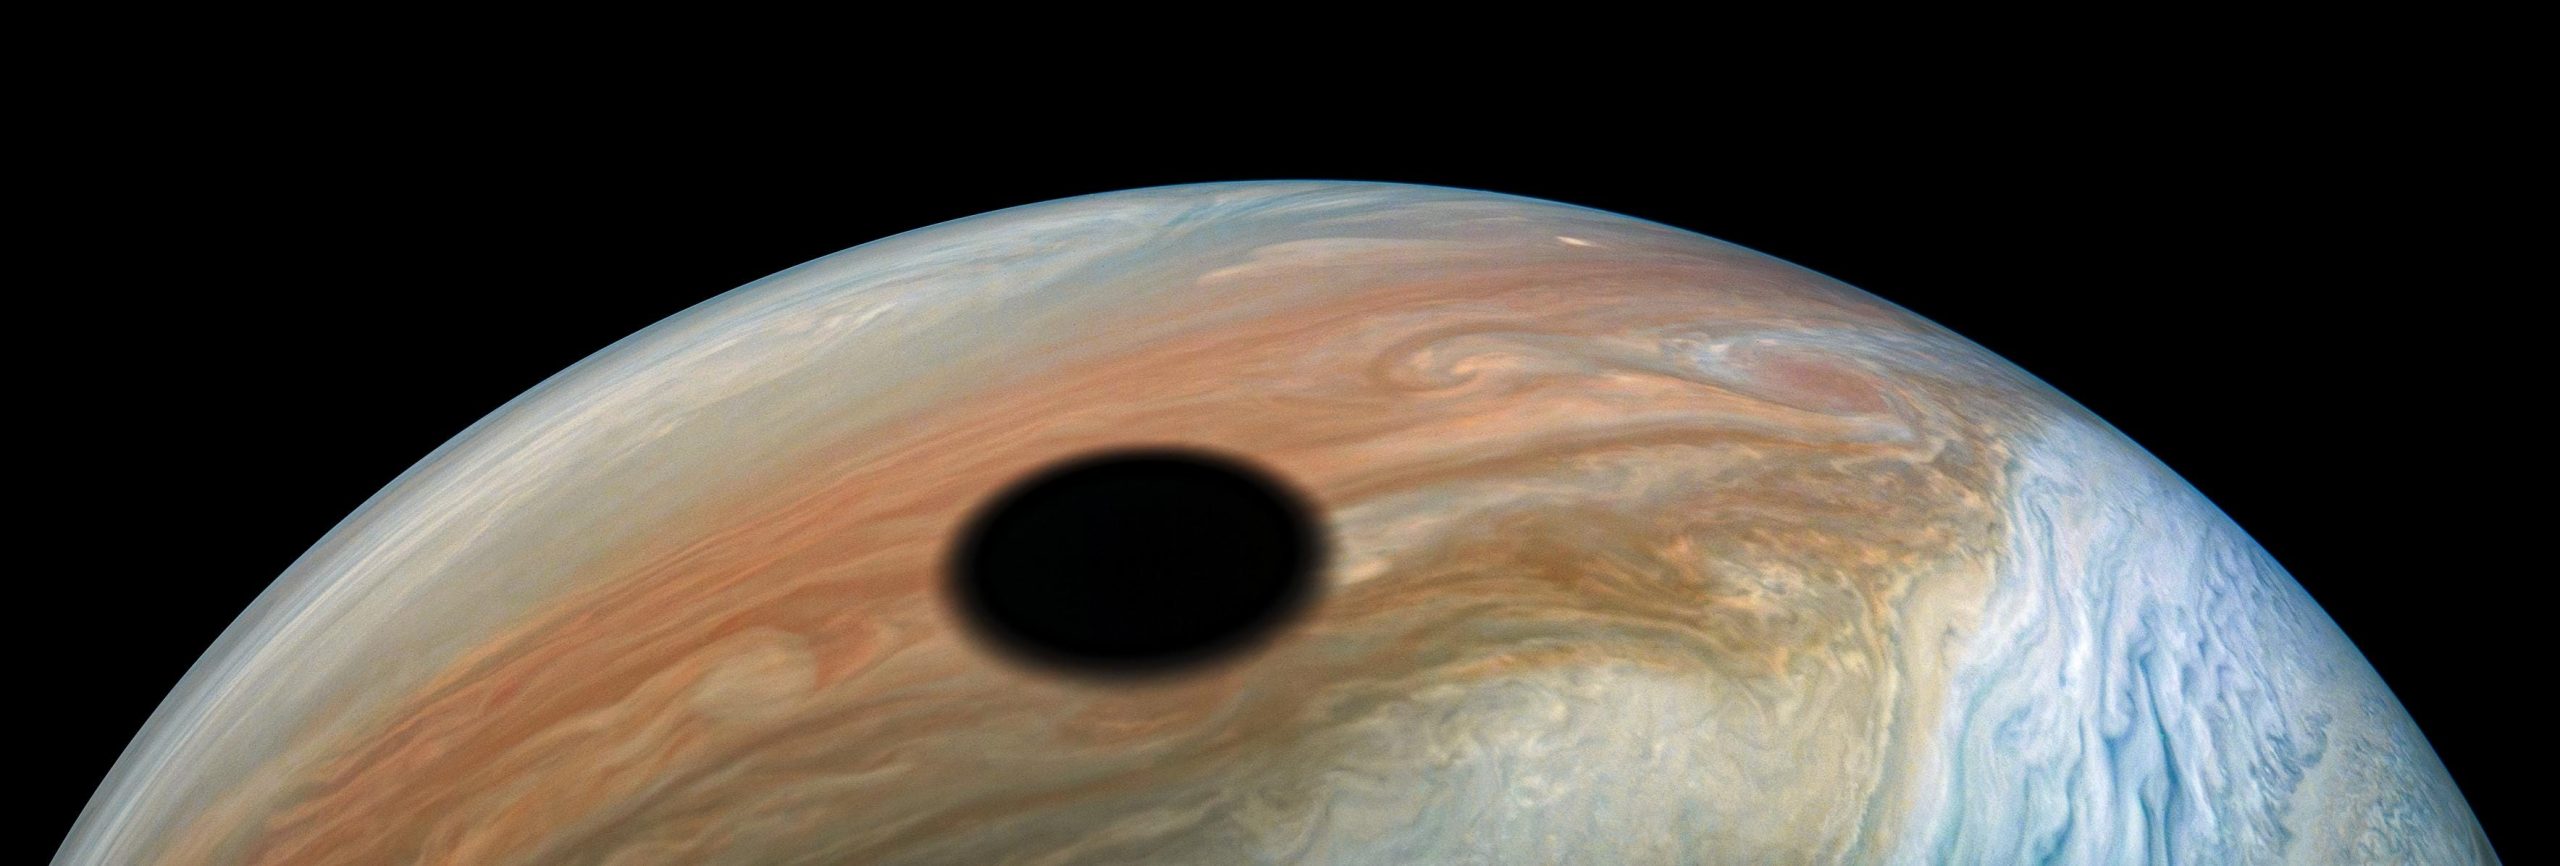 jupiter moon io casts shadow over planet's colorful bands